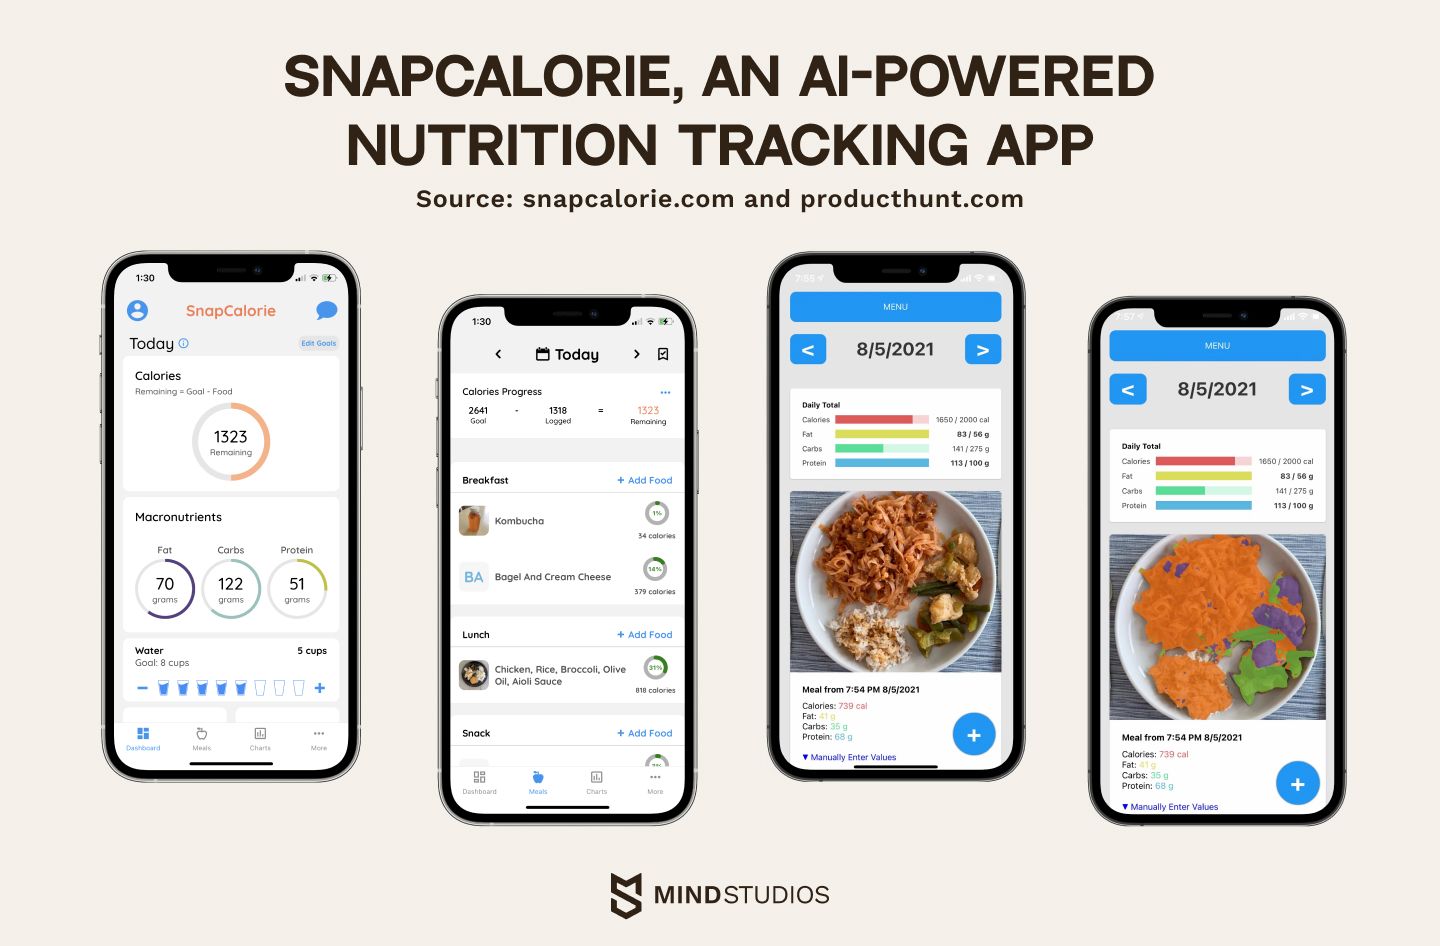 SnapCalorie, an AI-powered nutrition tracking app